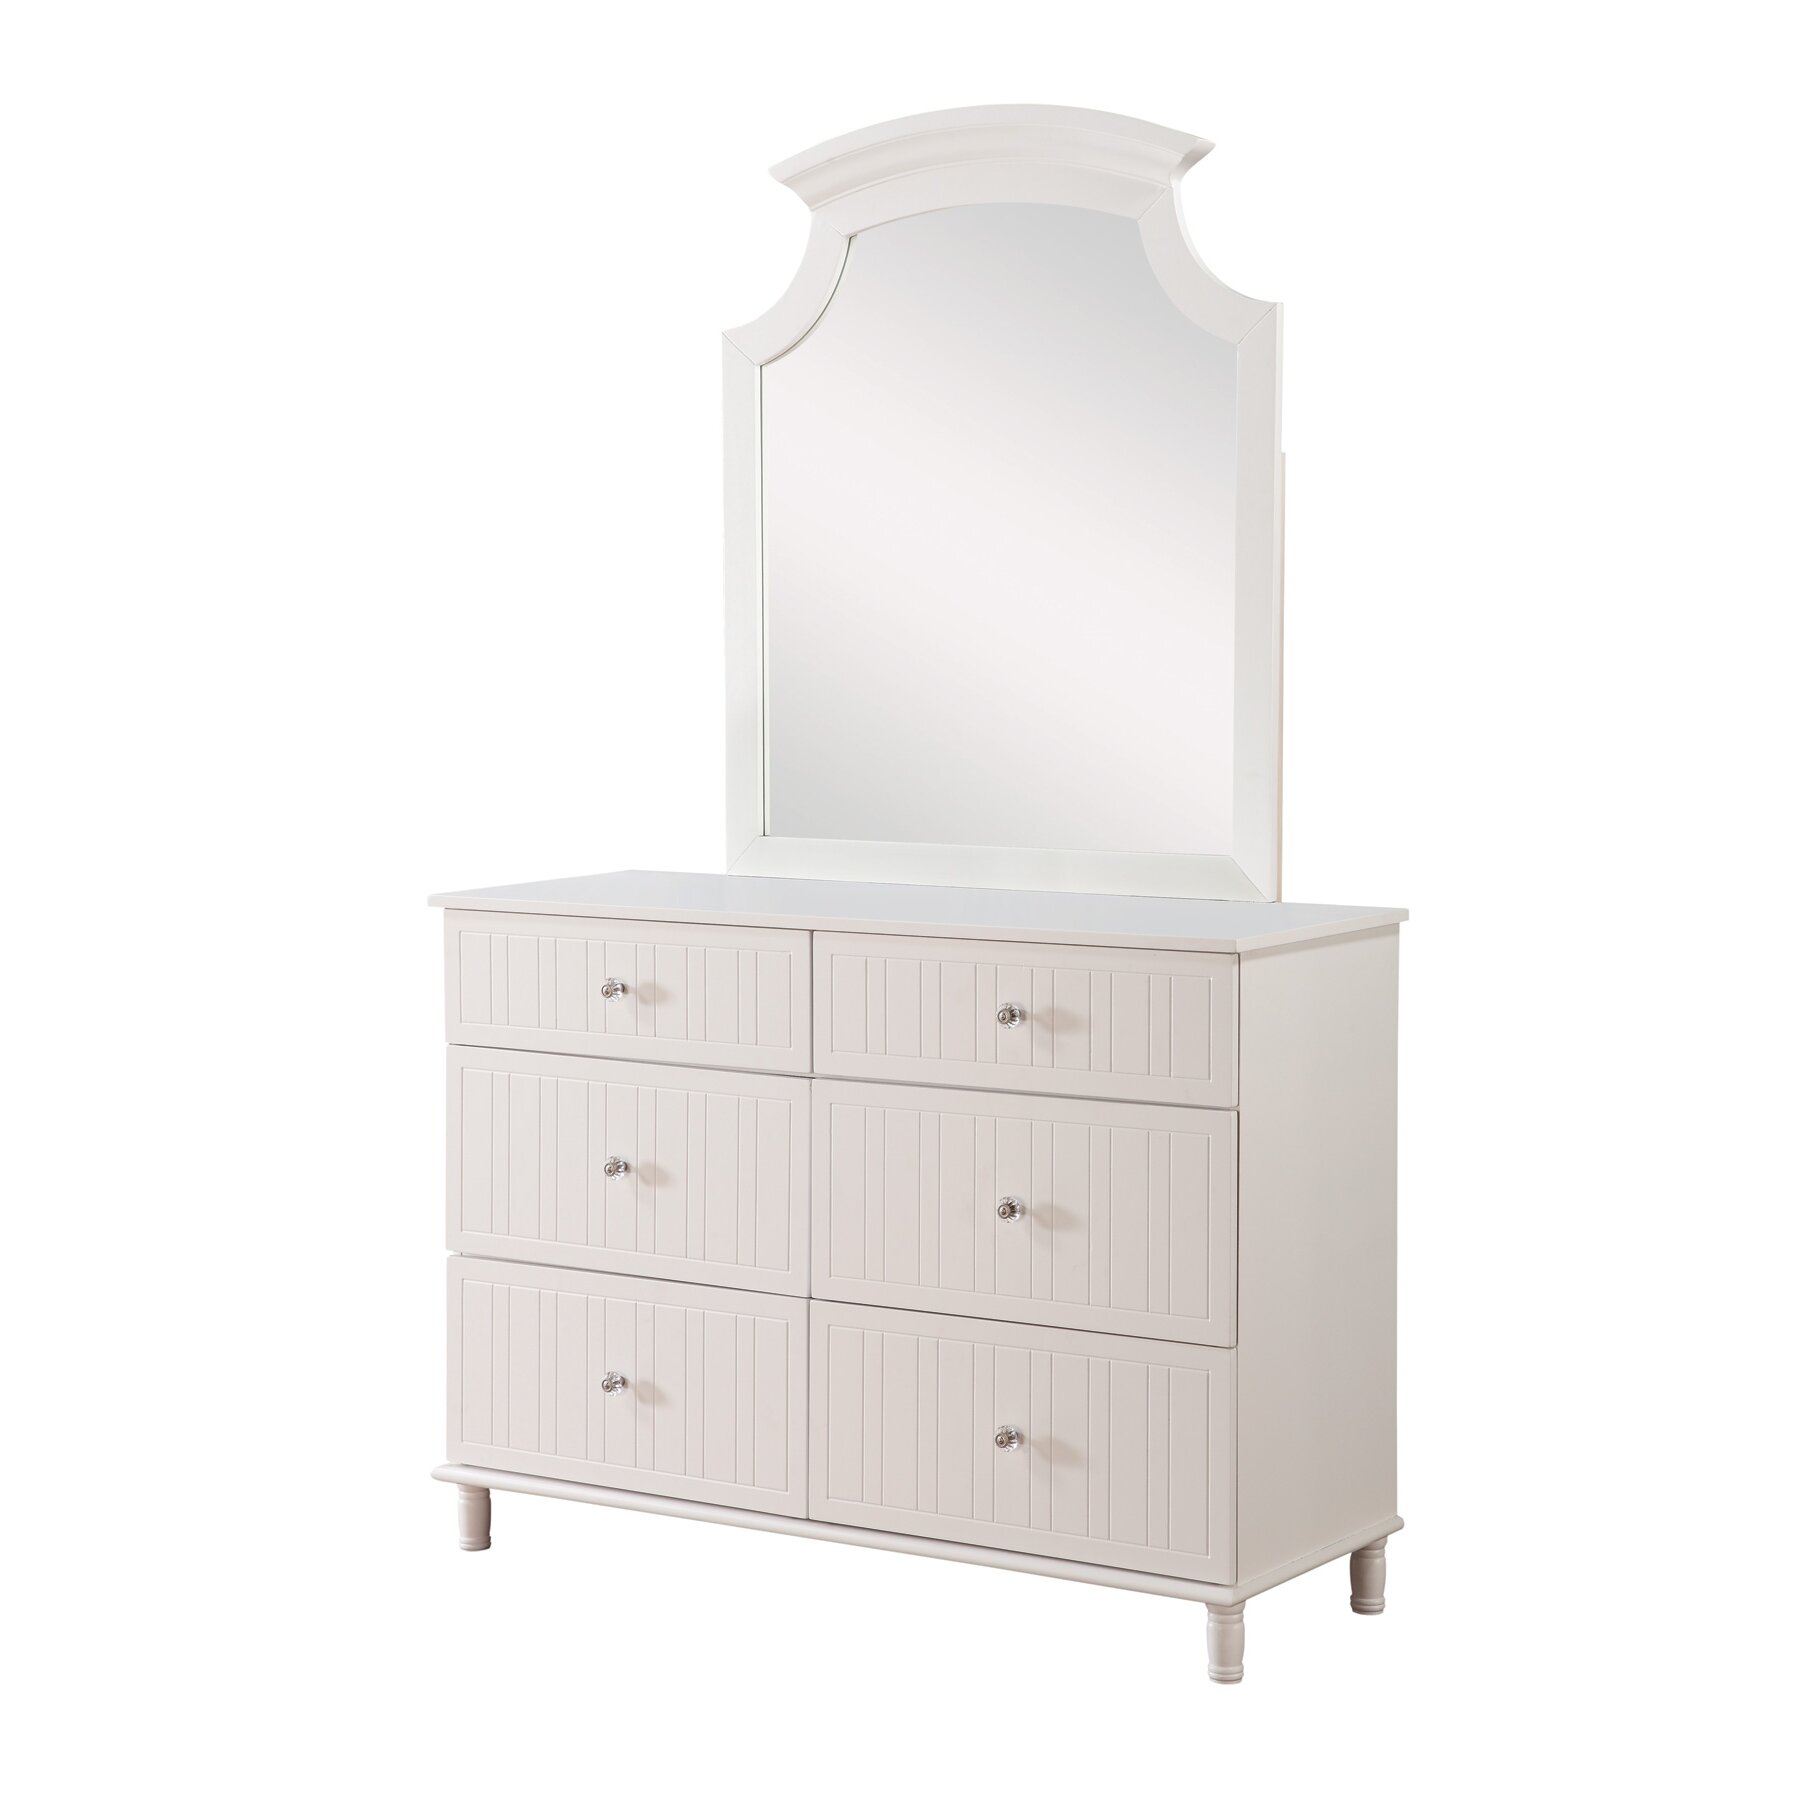 Wildon Home ® 6 Drawer Dresser With Mirror And Reviews Wayfair 1042